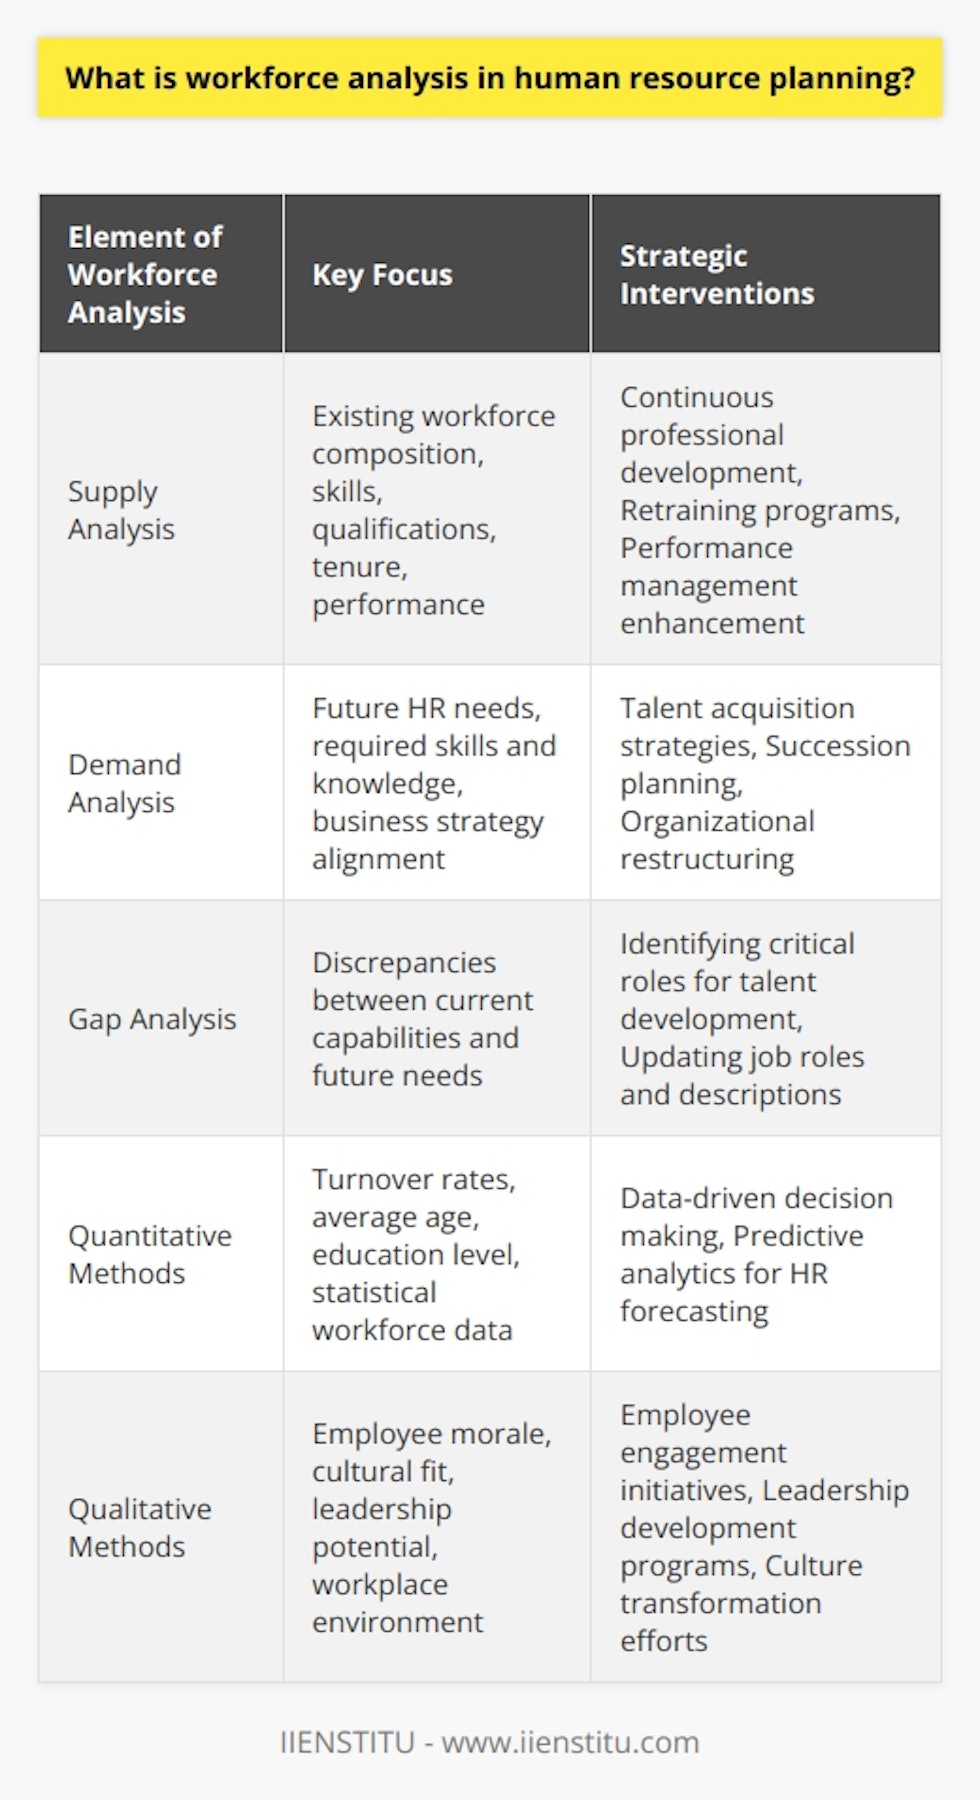 Workforce analysis is an essential aspect of human resource planning that informs the management about the composition and capability of the current employee pool and forecasts future organizational needs. It is crucial for crafting effective strategies for hiring, training, and overall workforce management, thus directly influencing an organization's ability to achieve its strategic goals.The Significance of Workforce Analysis in Human Resource PlanningImplementing workforce analysis is of paramount importance as it enables organizations to preemptively tackle potential workforce issues and align human resource capabilities with long-term strategic goals. By analyzing both the present and future states of the workforce, companies can proactively manage changes in the market, technology advancements, and evolving job roles.Approaches to Workforce AnalysisTo perform workforce analysis, HR professionals employ a combination of quantitative and qualitative methods. Quantitative methods might involve metrics such as employee turnover rates, average age, and education level—providing a statistical basis for planning. Meanwhile, qualitative approaches could include assessments of employee morale, cultural alignment, and leadership potential.The Core Elements of Workforce AnalysisThe process of workforce analysis can be broken down into three critical elements, each focusing on different aspects of the organization's labor resources:1. Supply Analysis: This aspect scrutinizes the existing workforce, looking into individual and collective qualifications, tenure, job performance, and the overall ability to meet current workload and performance standards.2. Demand Analysis: This element forecasts the human resource needs of the organization concerning its business strategy and goals. Demand analysis predicts the skills, knowledge, and experience required to meet future company objectives, considering industry trends and the competitive landscape.3. Gap Analysis: As the bridge between supply and demand, gap analysis pinpoints the discrepancies between the current workforce capability and future organizational needs. It discovers where shortages, redundancies, or mismatches in skills or job roles exist.Strategic Workforce InterventionsOrganizations respond to the insights gained from workforce analysis by implementing strategic interventions. These might consist of talent acquisition strategies, initiatives to enhance skills through professional development, or managerial succession planning to ensure continuity of expertise within key roles. In some cases, it could lead to organizational restructuring.Importance of Accurate and Actionable InsightsThe process of workforce analysis demands accurate data collection and insightful interpretation. Utilizing tools and technologies can help HR professionals gather data more effectively, yet the interpretation of this data requires professional judgment and an understanding of the broader industry context.For workforce analysis to be genuinely effective, it mandates consistent alignment with the organization's core values, mission, and strategy. This may involve revising job descriptions, developing new performance management frameworks, or tailoring employee engagement programs to address the identified gaps.ConclusionWorkforce analysis remains a critical tool in the human resource toolbox, vital for any organization aiming to stay competitive and agile in a rapidly evolving business landscape. By assessing workforce dynamics and projecting future needs, organizations can make strategic decisions to enhance productivity, sustain employee satisfaction, and ensure a robust talent pipeline that aligns with company objectives. It is a continuous process requiring ongoing attention to maintain an effective and efficient workforce primed for the challenges of tomorrow.